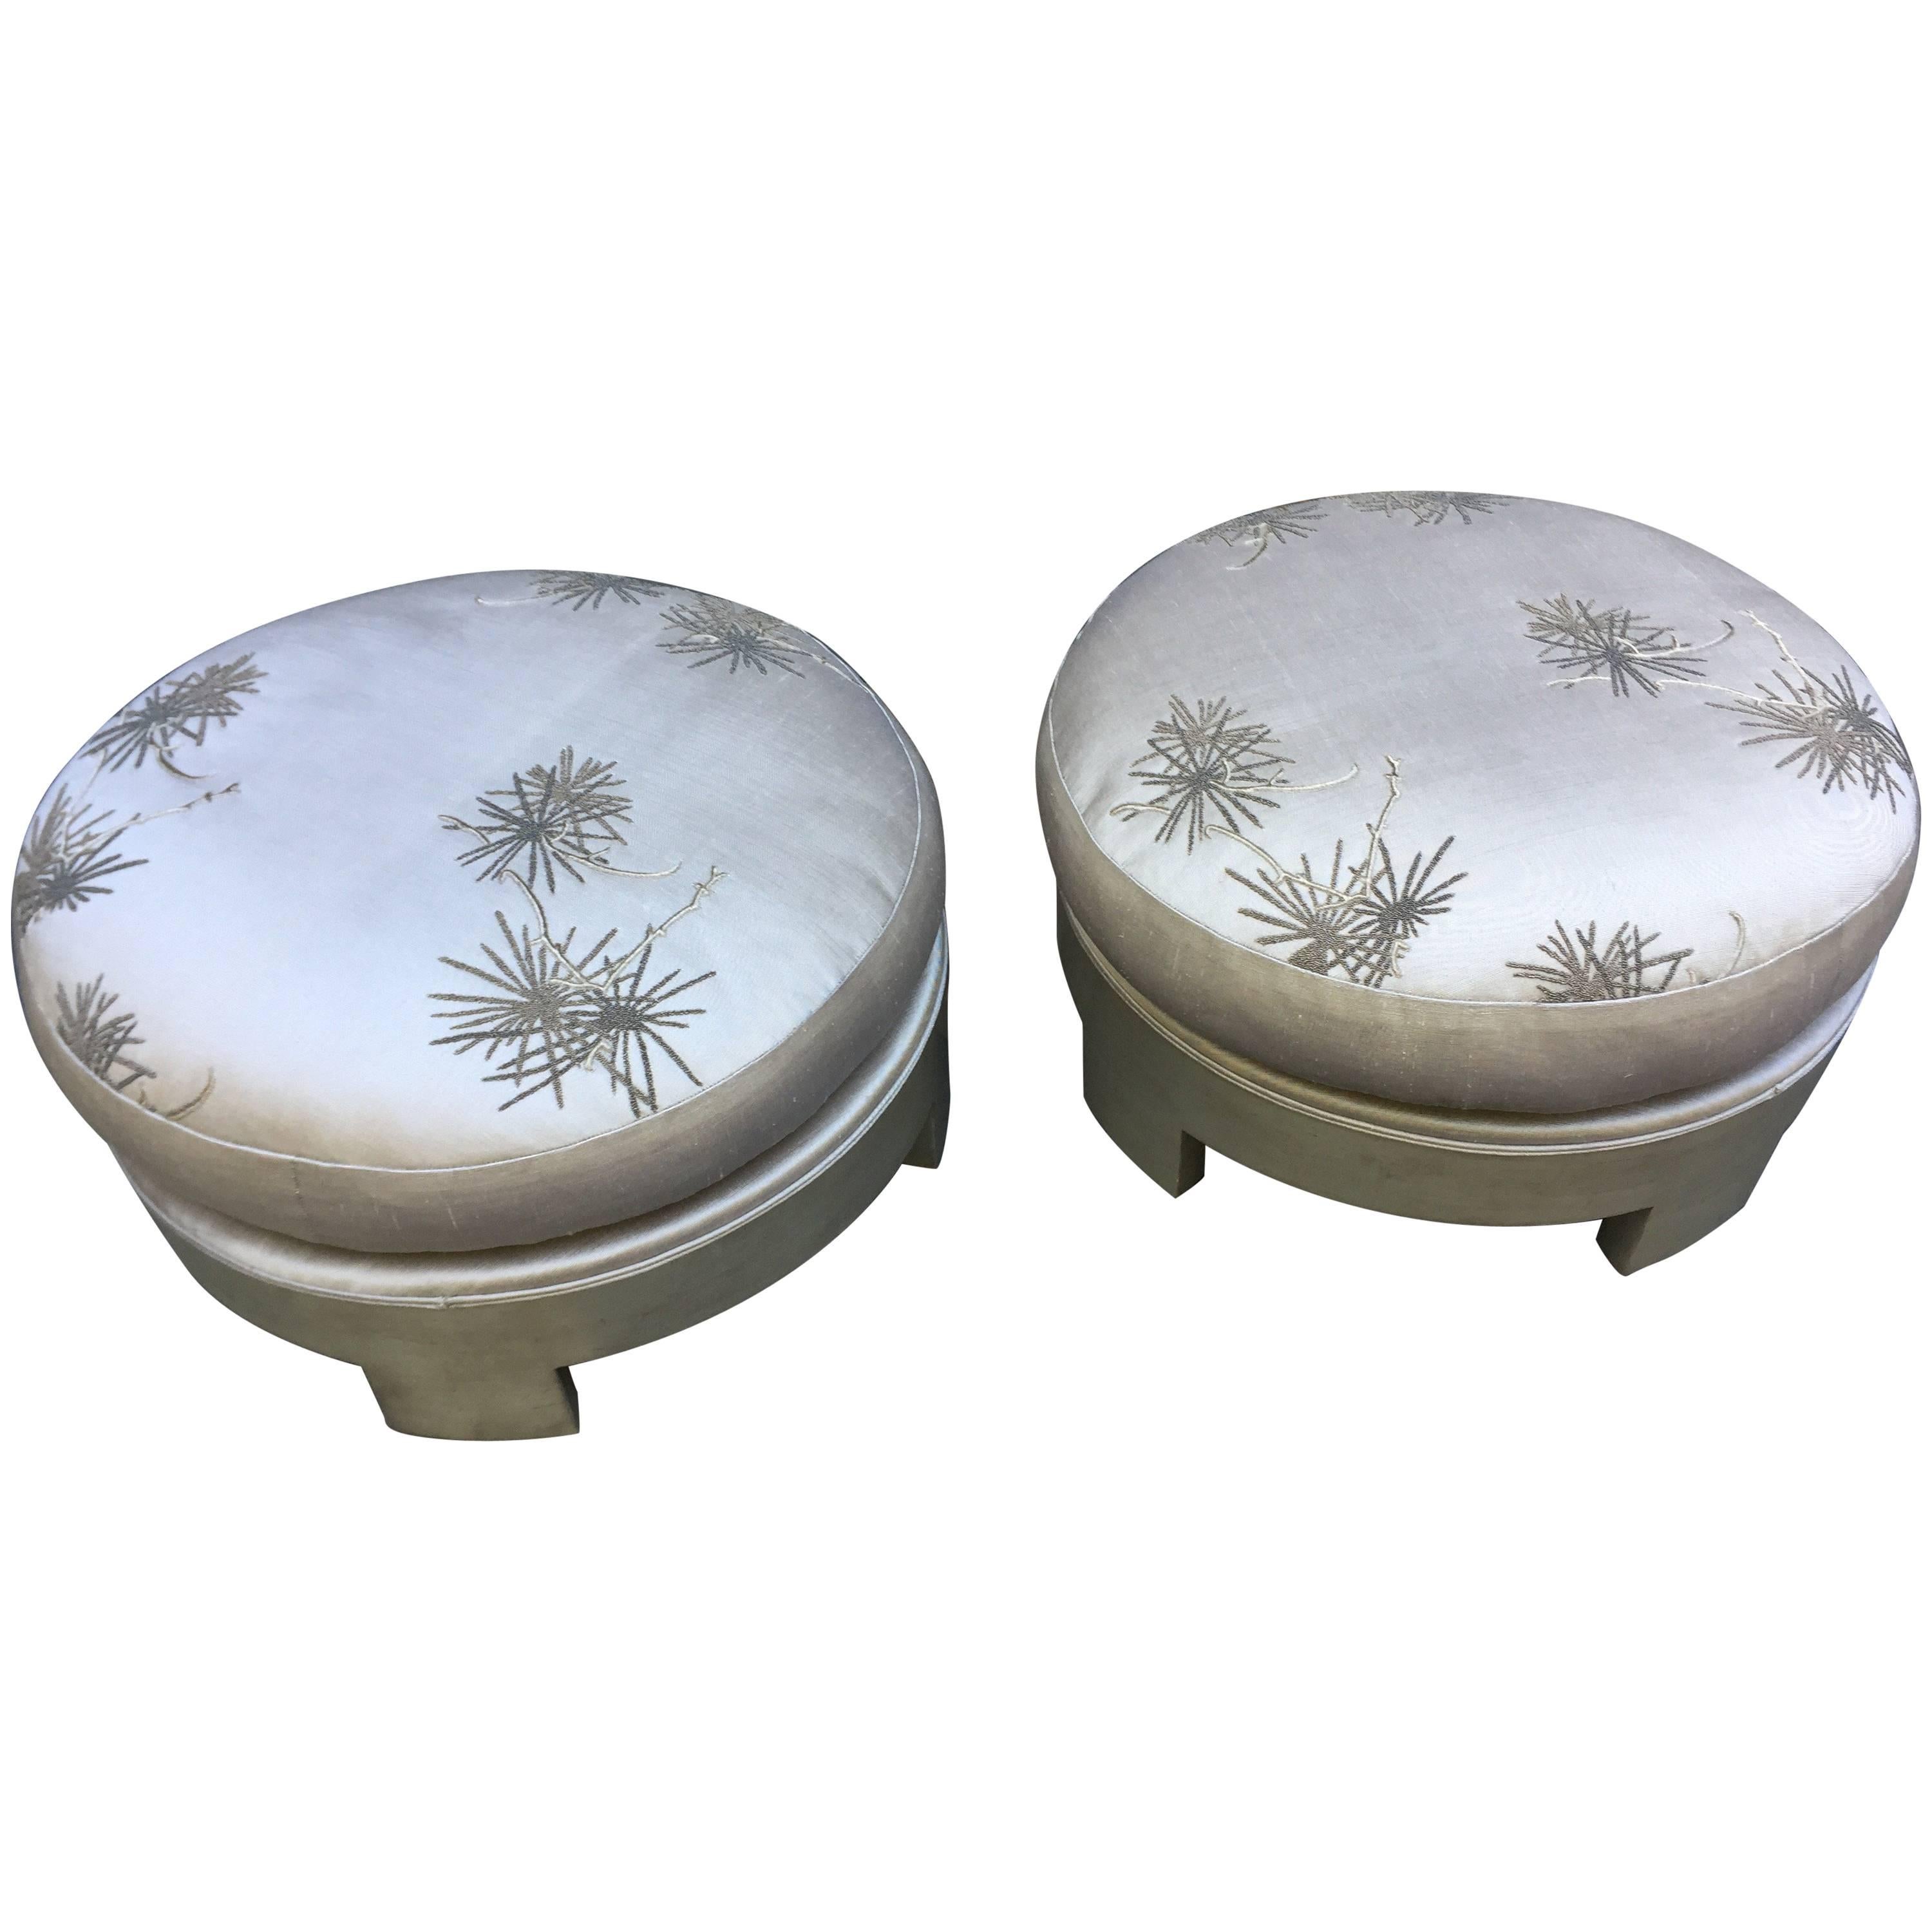 Pair of Stools Floral Contemporary Hand Embroidered White Gold Gilded Wood Base